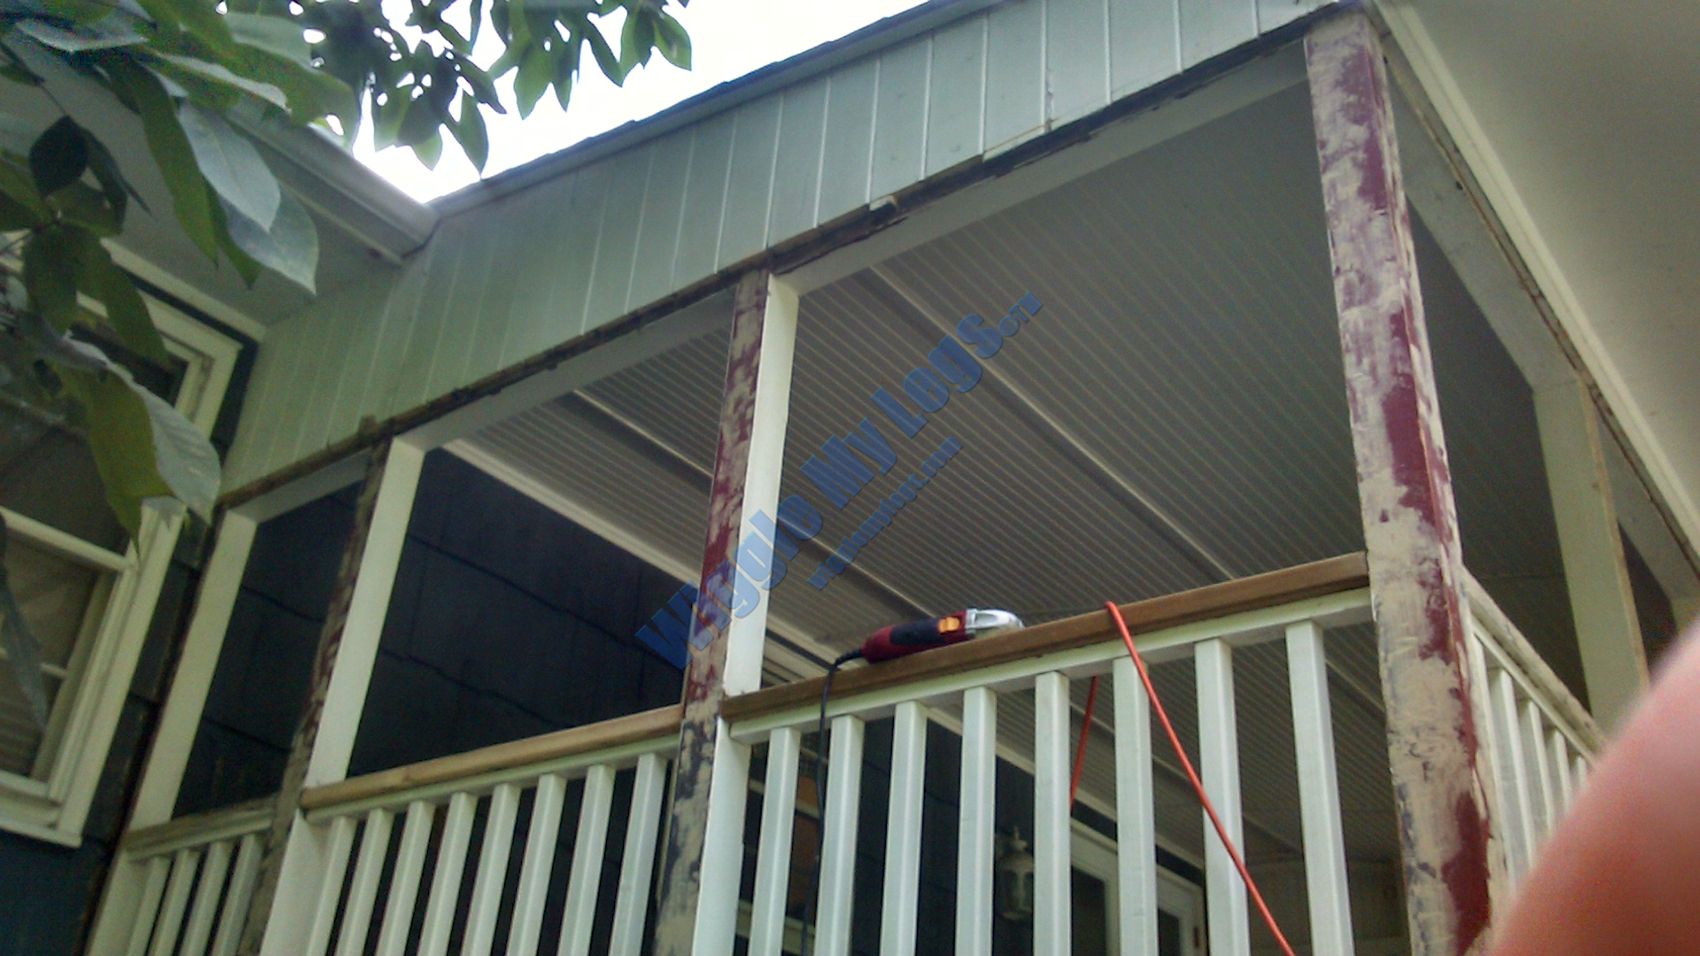 Gable with bottom edge of rotting shiplap siding being sawed off to make room for new frame for screens and remove rot.